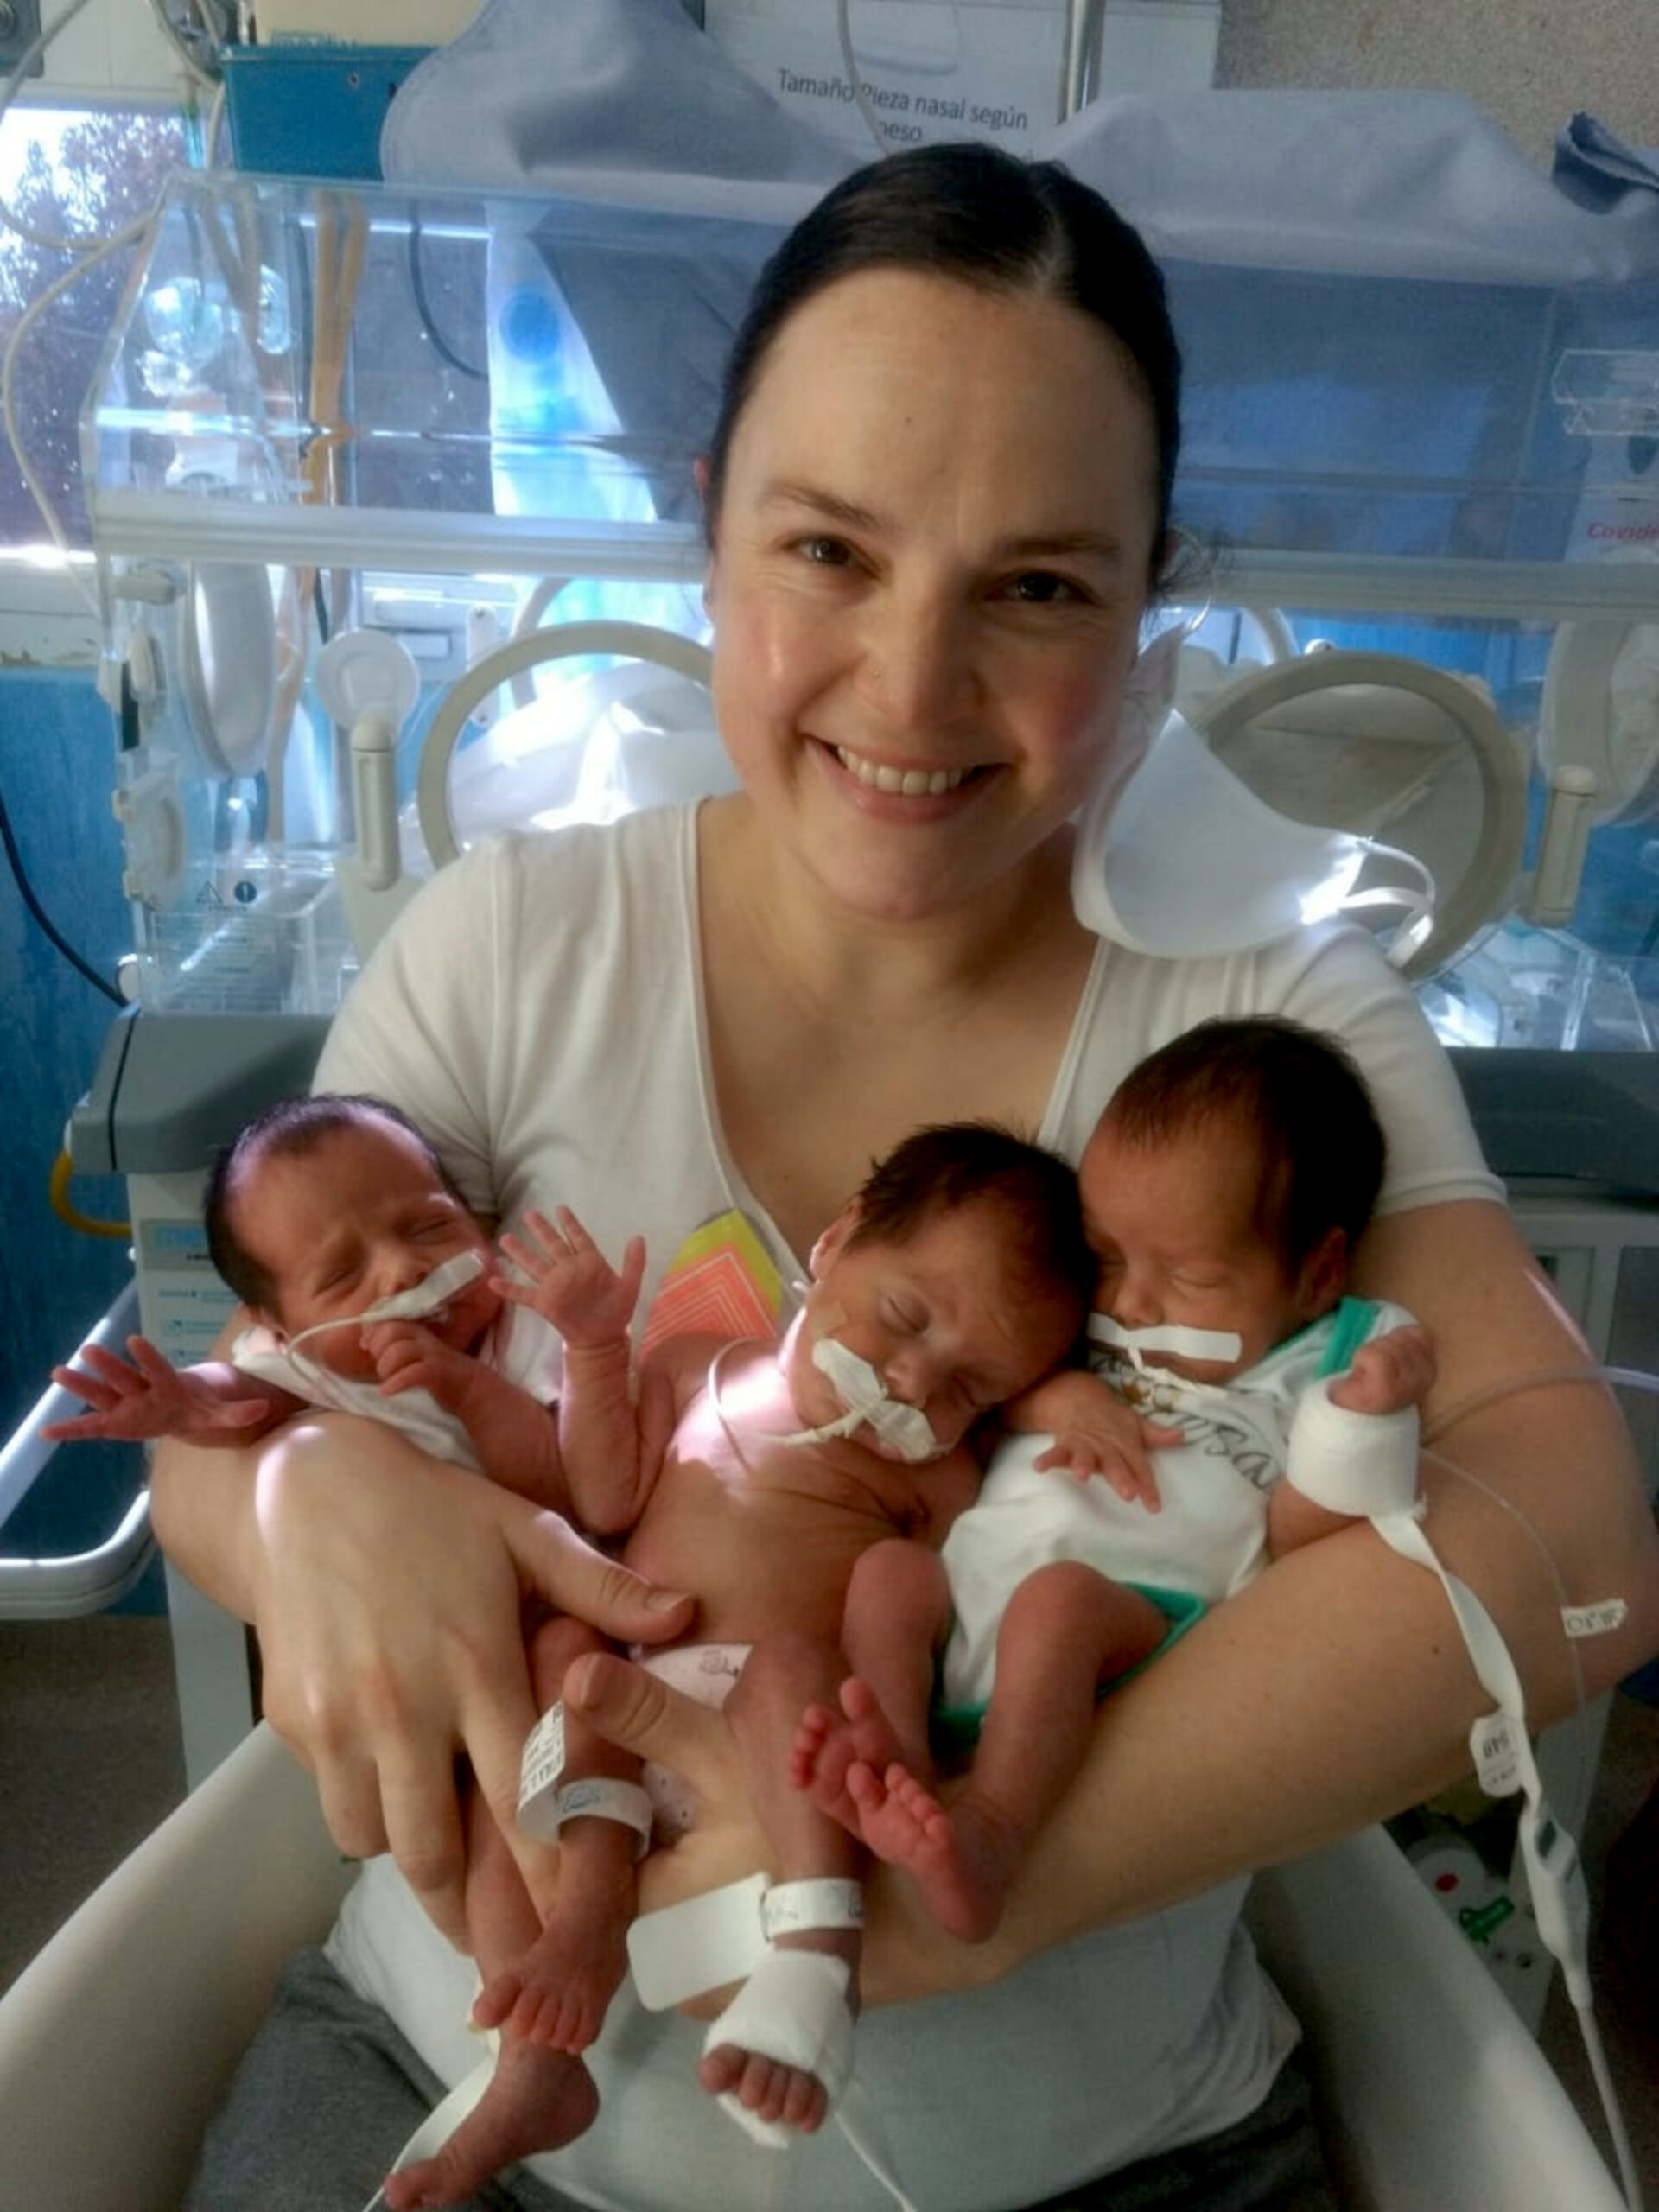 Girl Power Rare Identical Triplets Born In Argentina Are Back Home Free Press Of Jacksonville